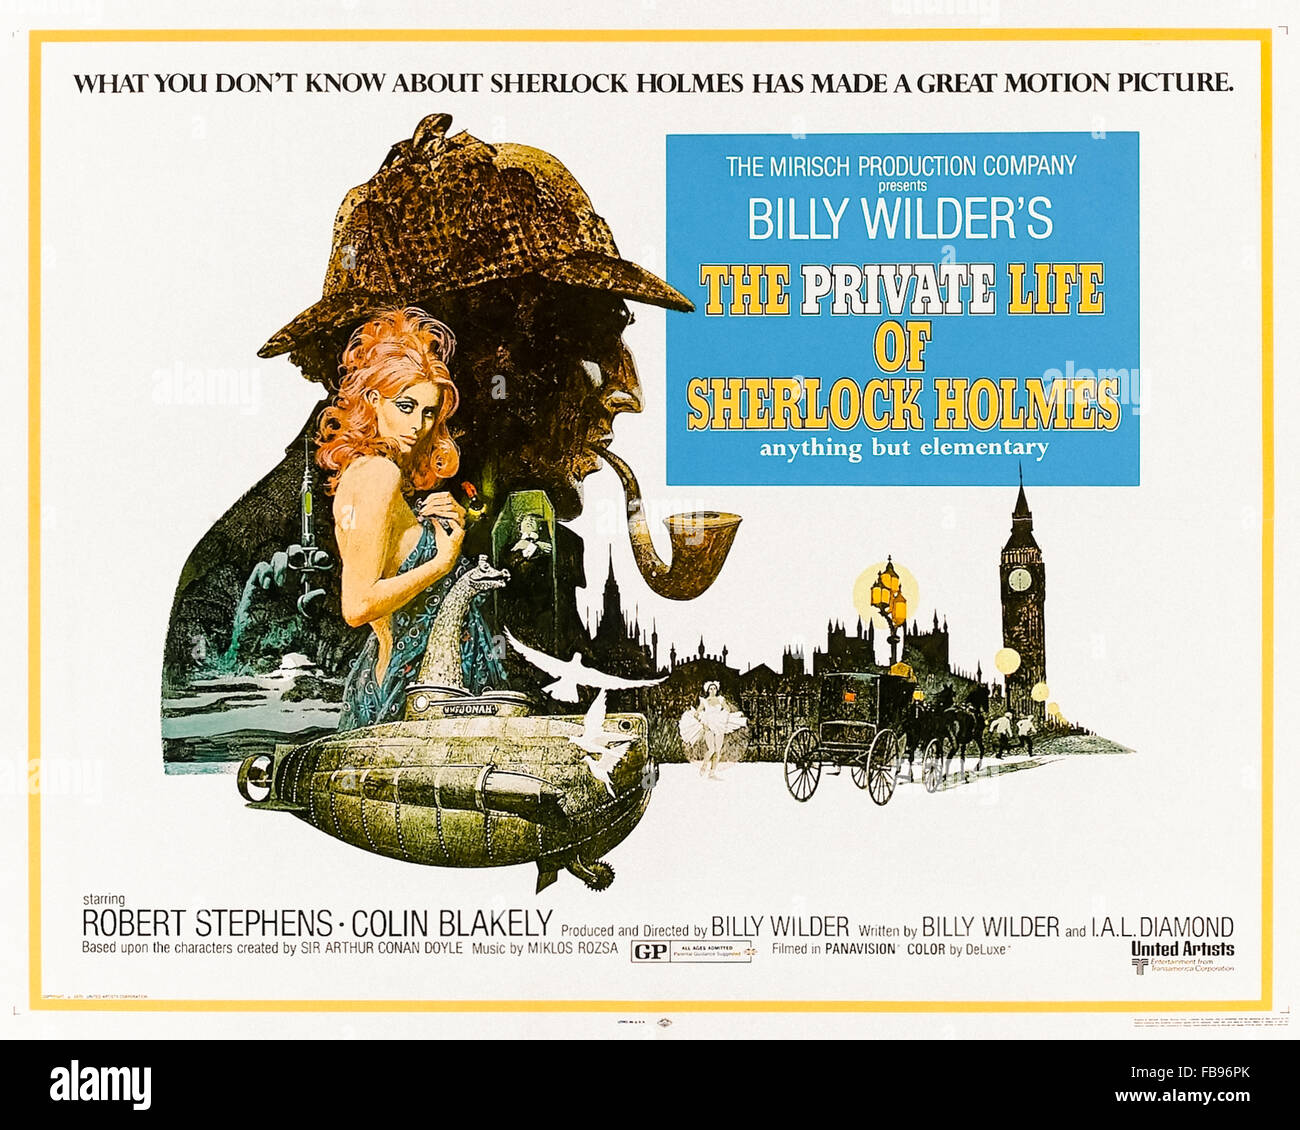 Theatrical Poster for 'The Private Life of Sherlock Holmes' 1970 film directed by Billy Wilder starring Robert Stephens as Sherlock Holmes, Colin Blakely as Dr. Watson and Geneviève Page as Gabrielle. See description for more information Stock Photo